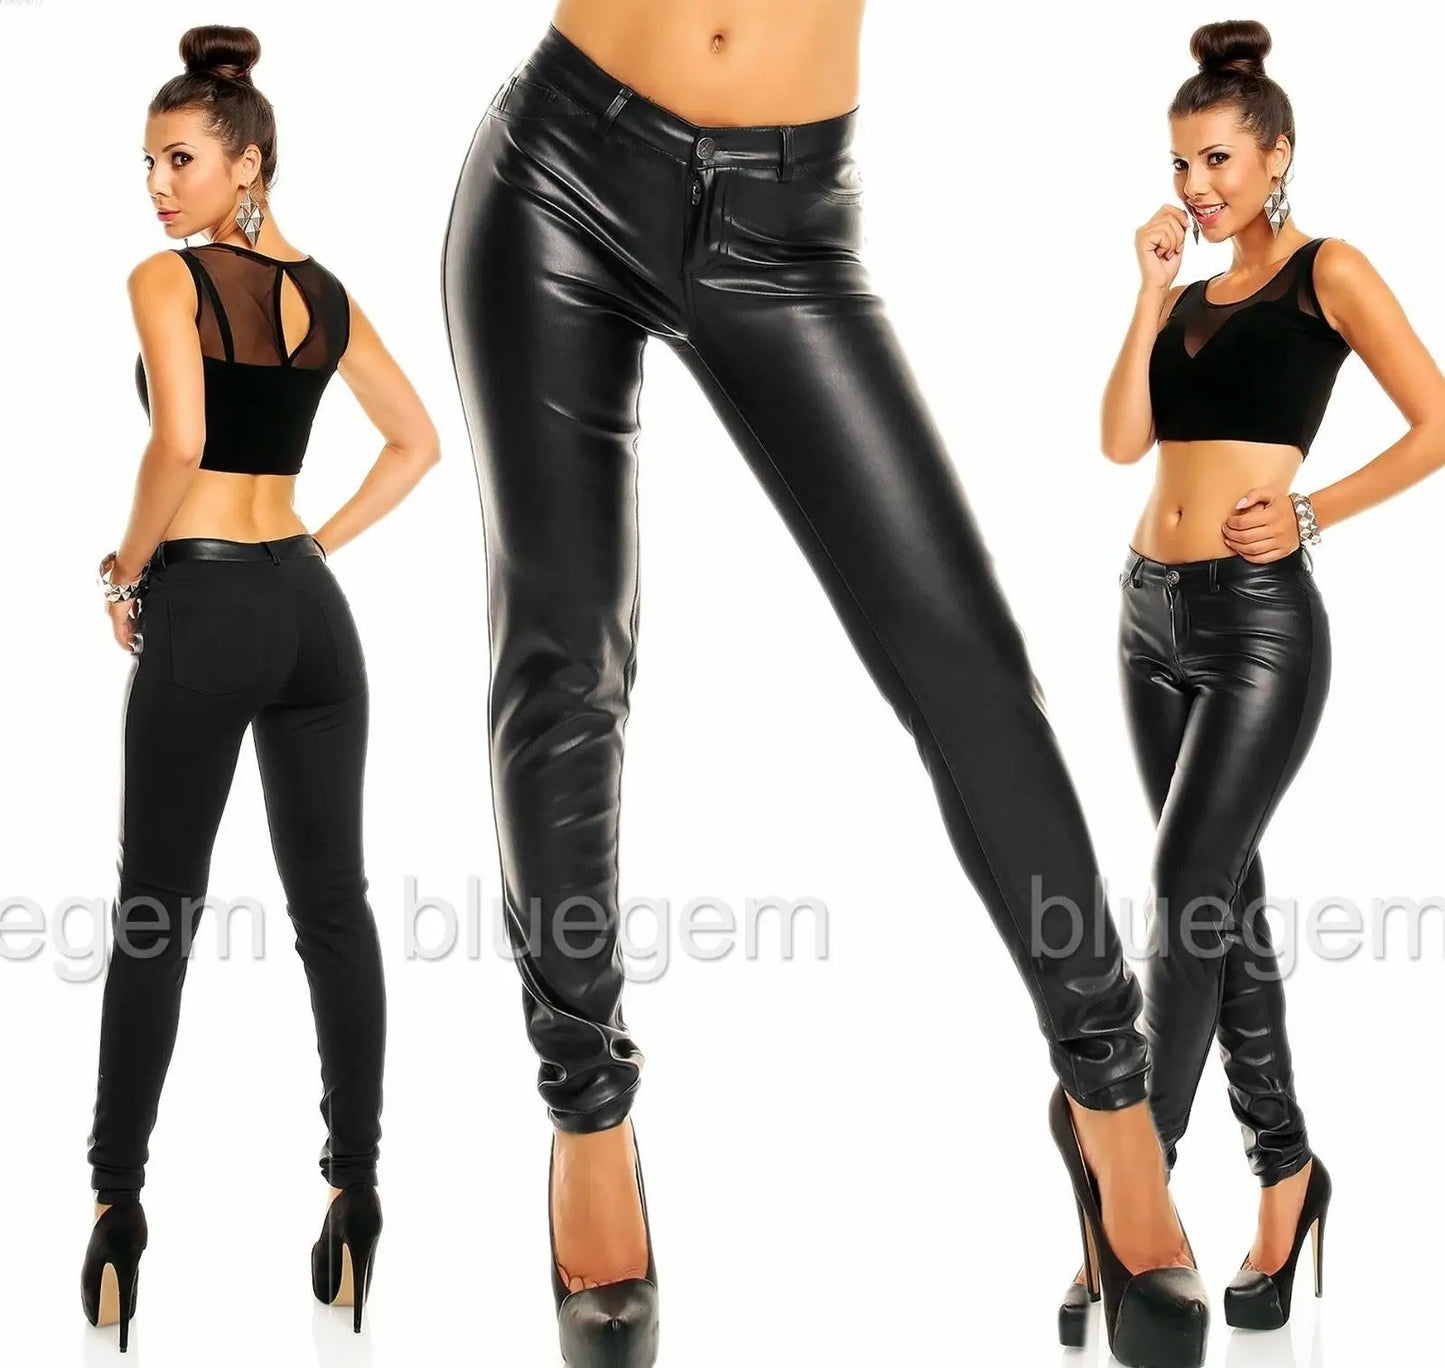 PUNK/ROCK/CLUB Ladies Leather Front Trousers Jeans by Sub-Level Sizes 8-12 Sub Level